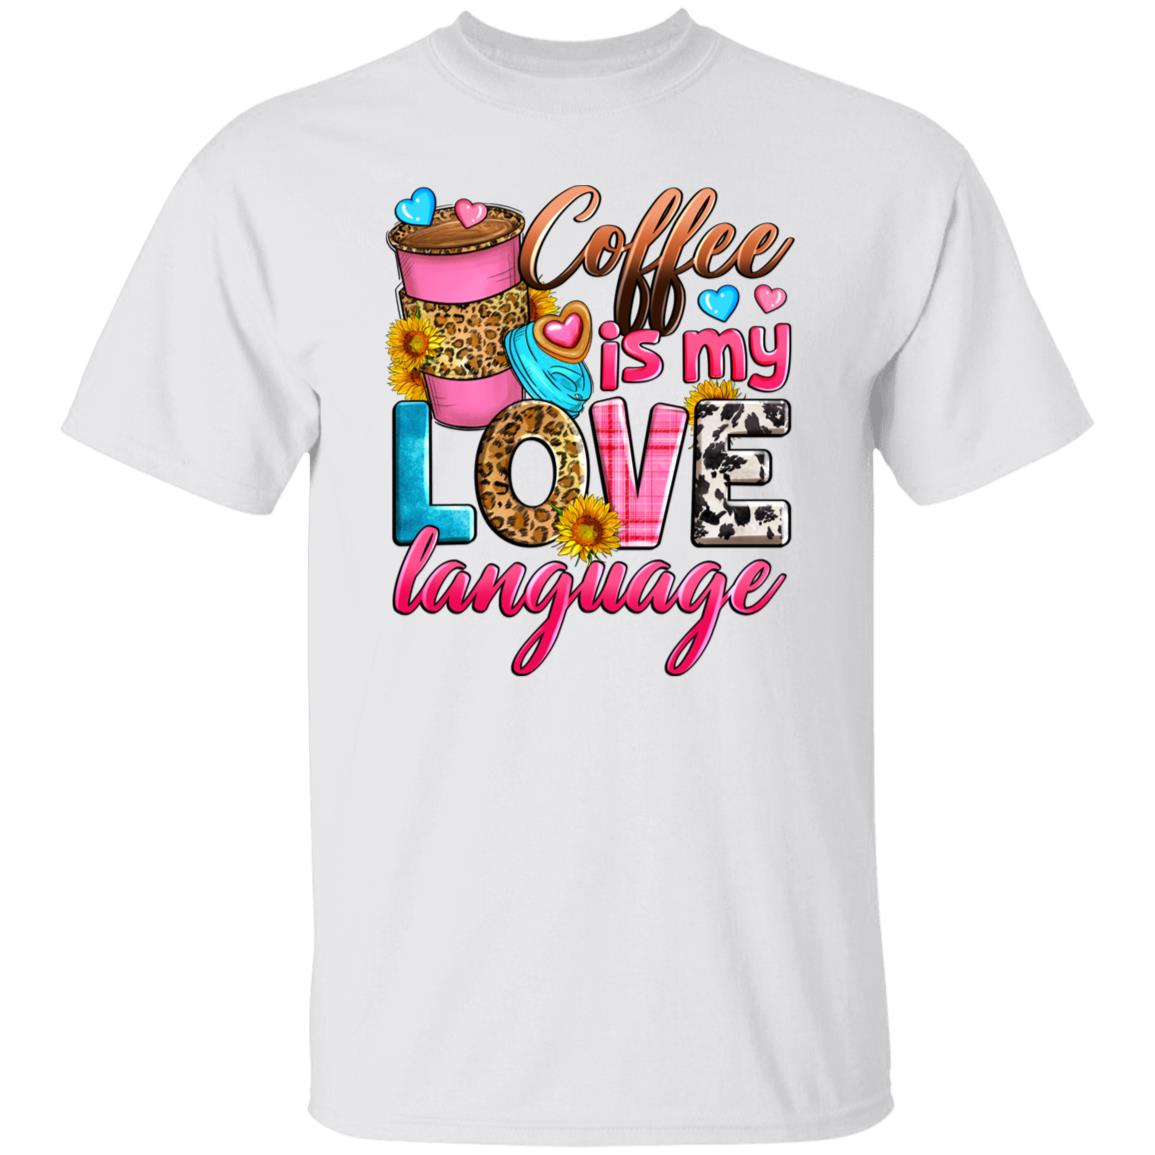 Coffee is my love language T-Shirt Barista coffee lover Unisex tee White Sand Sport Grey-Family-Gift-Planet